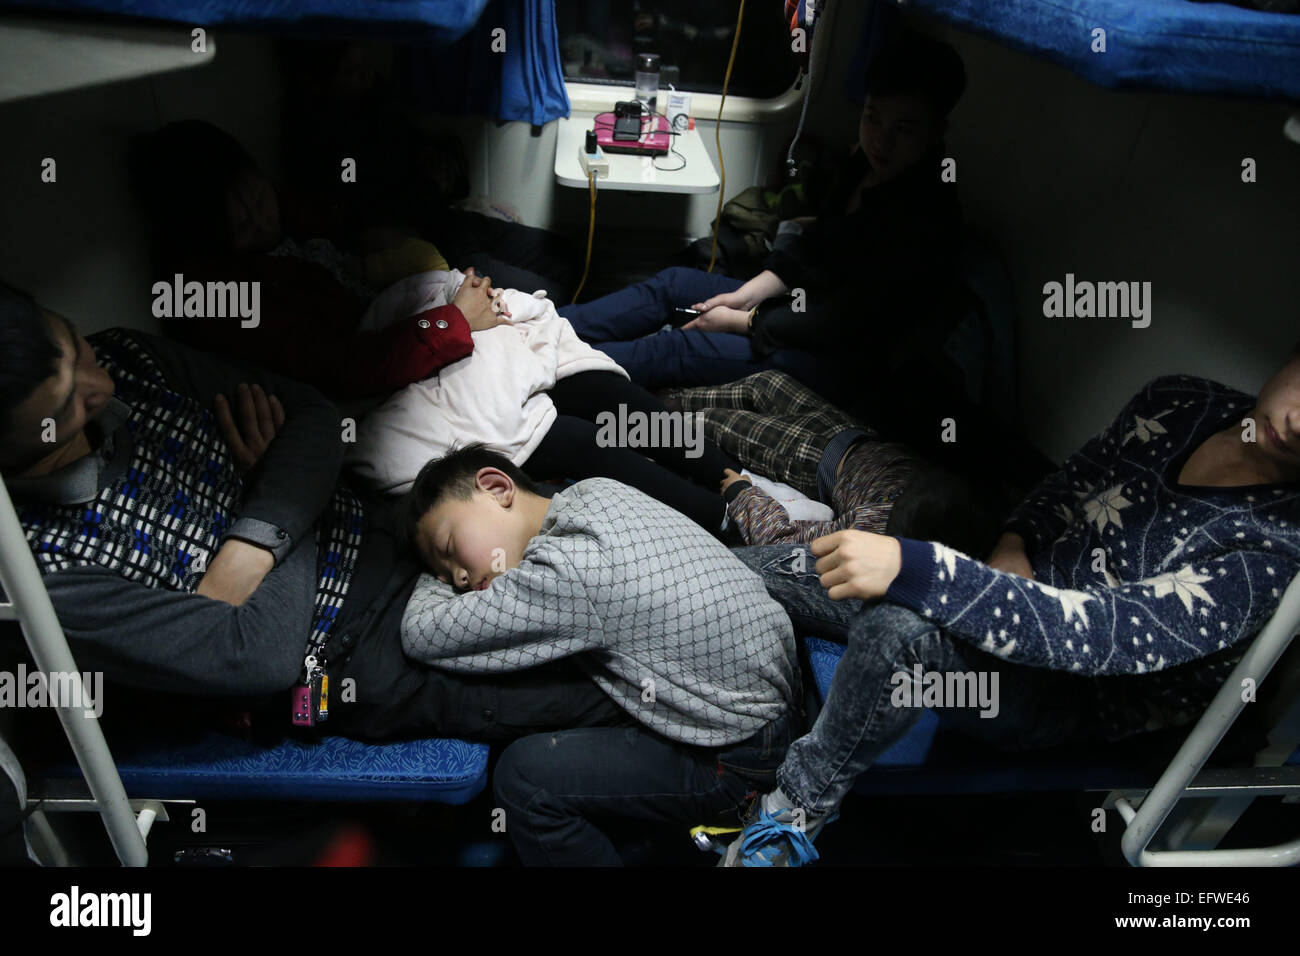 Shanghai, China's Sichuan Province. 9th Sep, 2015. Passengers have a sleep on train 3663, which runs from east China's Shanghai to Chengdu, capital of southwest China's Sichuan Province, on Sept. 9, 2015. The Spring Festival, or the Chinese lunar New Year which starts from Feb. 19 this year, is known as the world's biggest migration, with millions of people traveling vast distances for family reunions. © Ding Ting/Xinhua/Alamy Live News Stock Photo